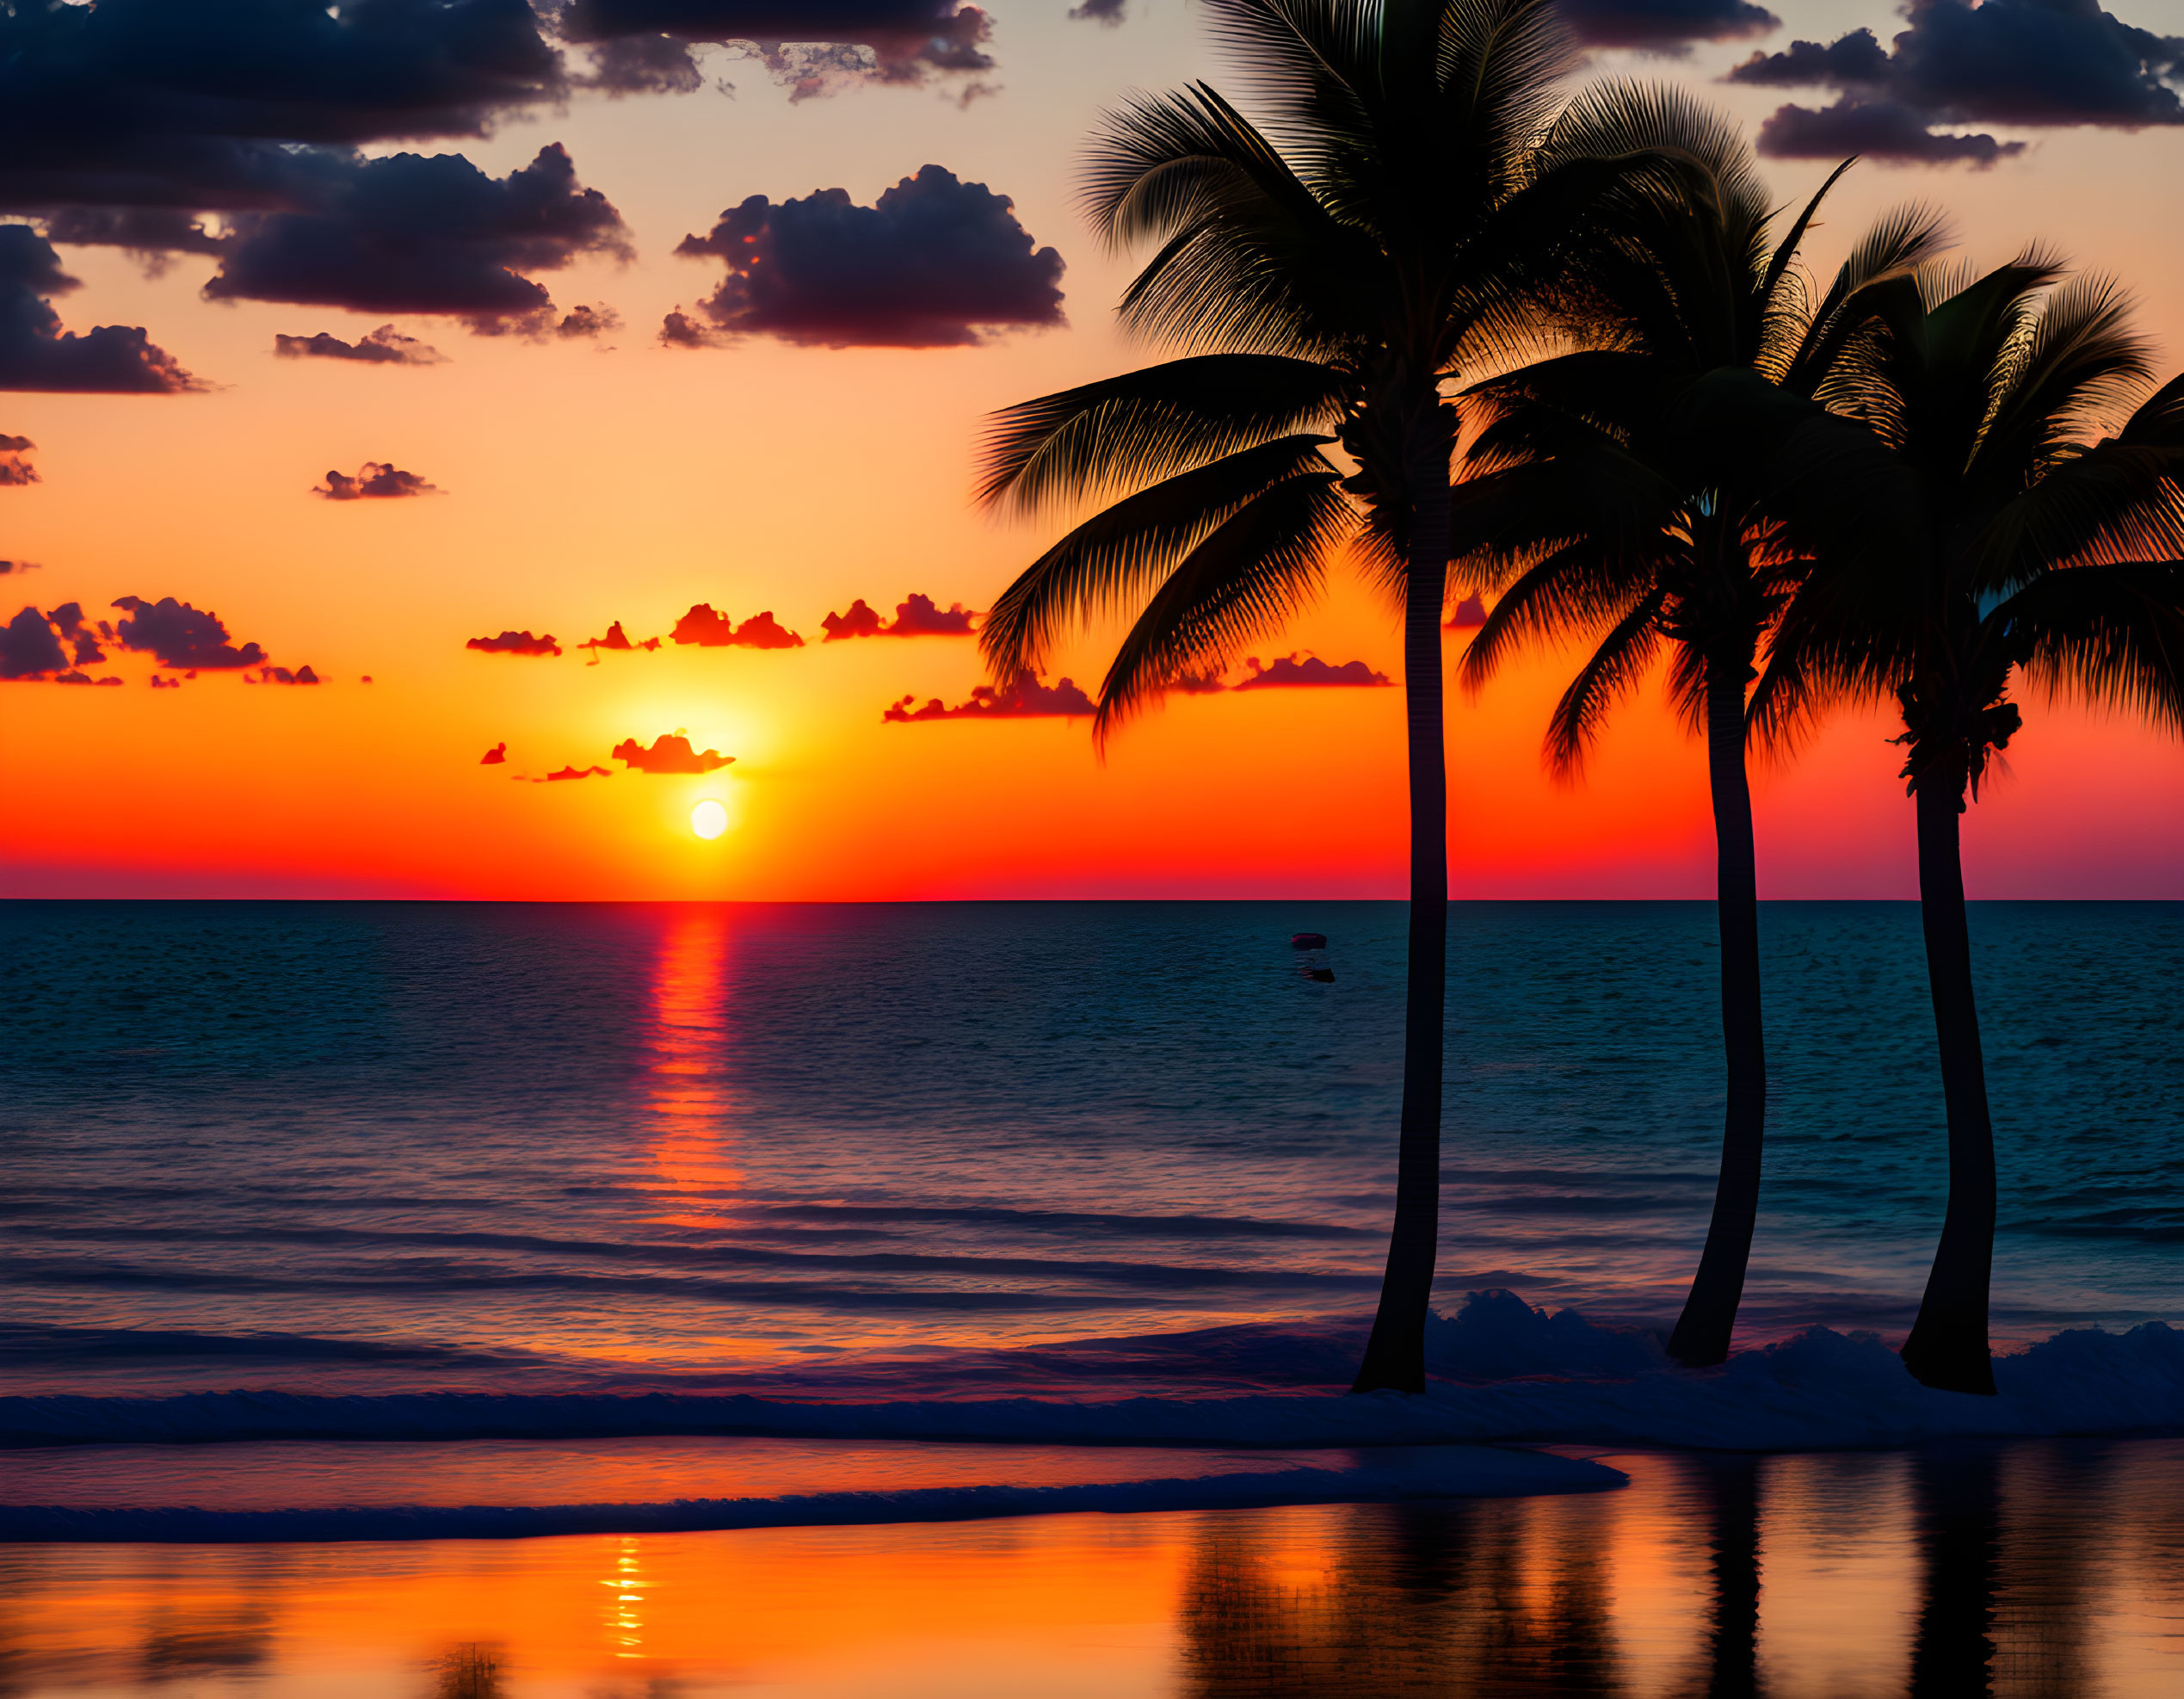 Scenic tropical beach sunset with palm tree silhouettes.